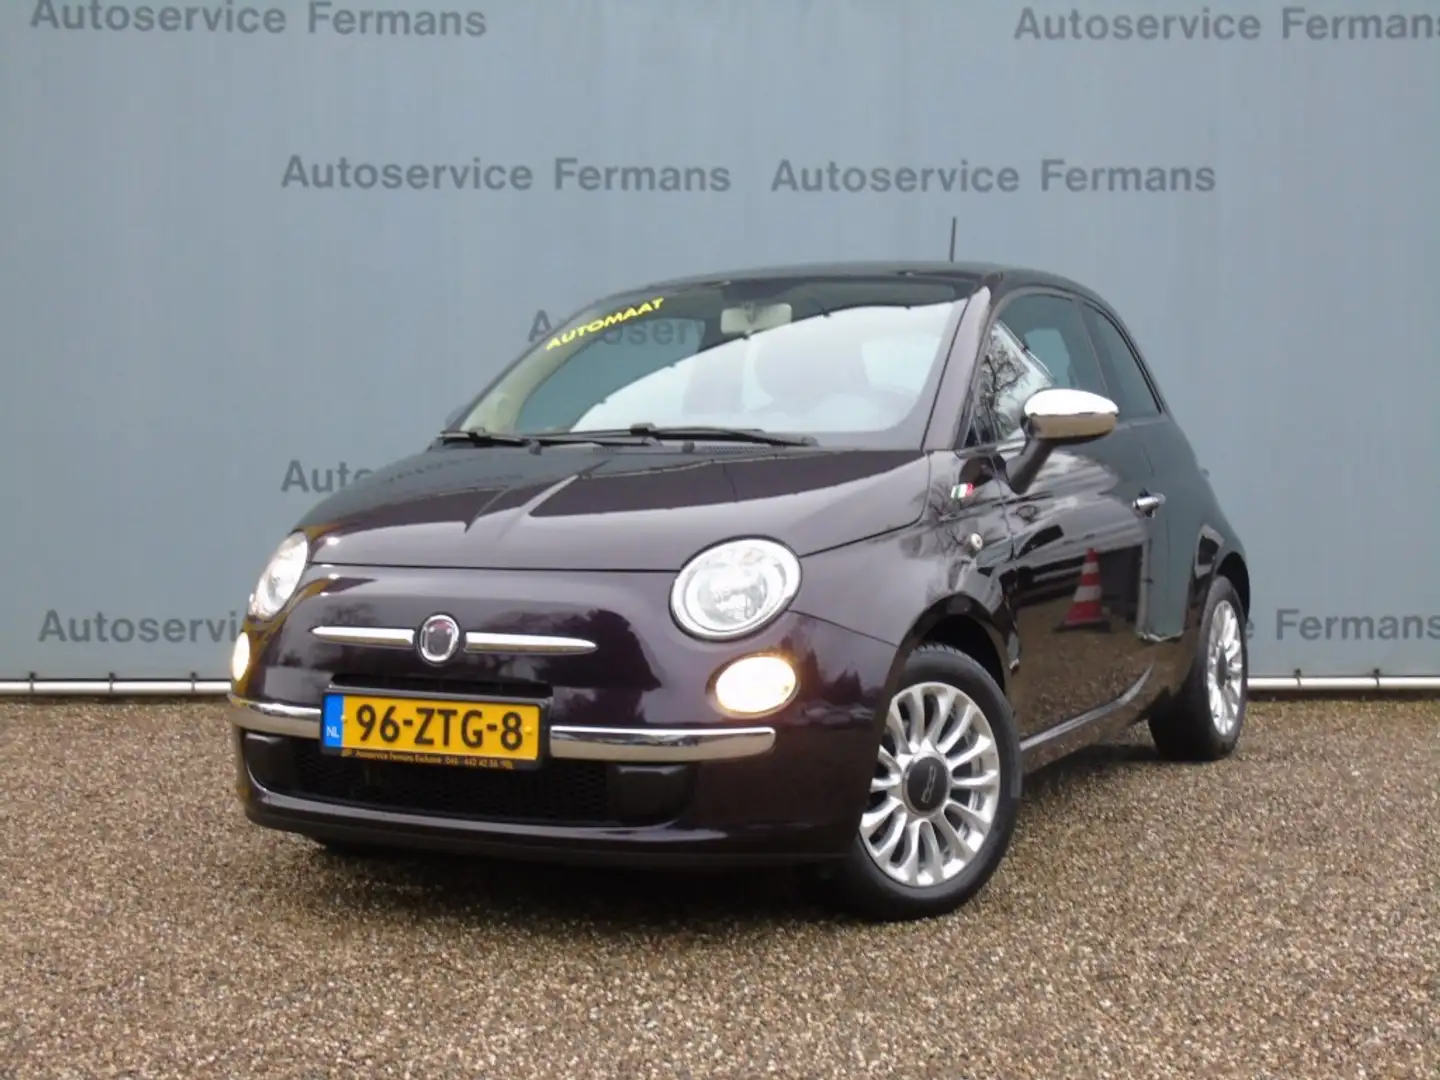 Fiat 500 500 twin air Lounge Automaat - 2013 - 78DM - Airco Paars - 1